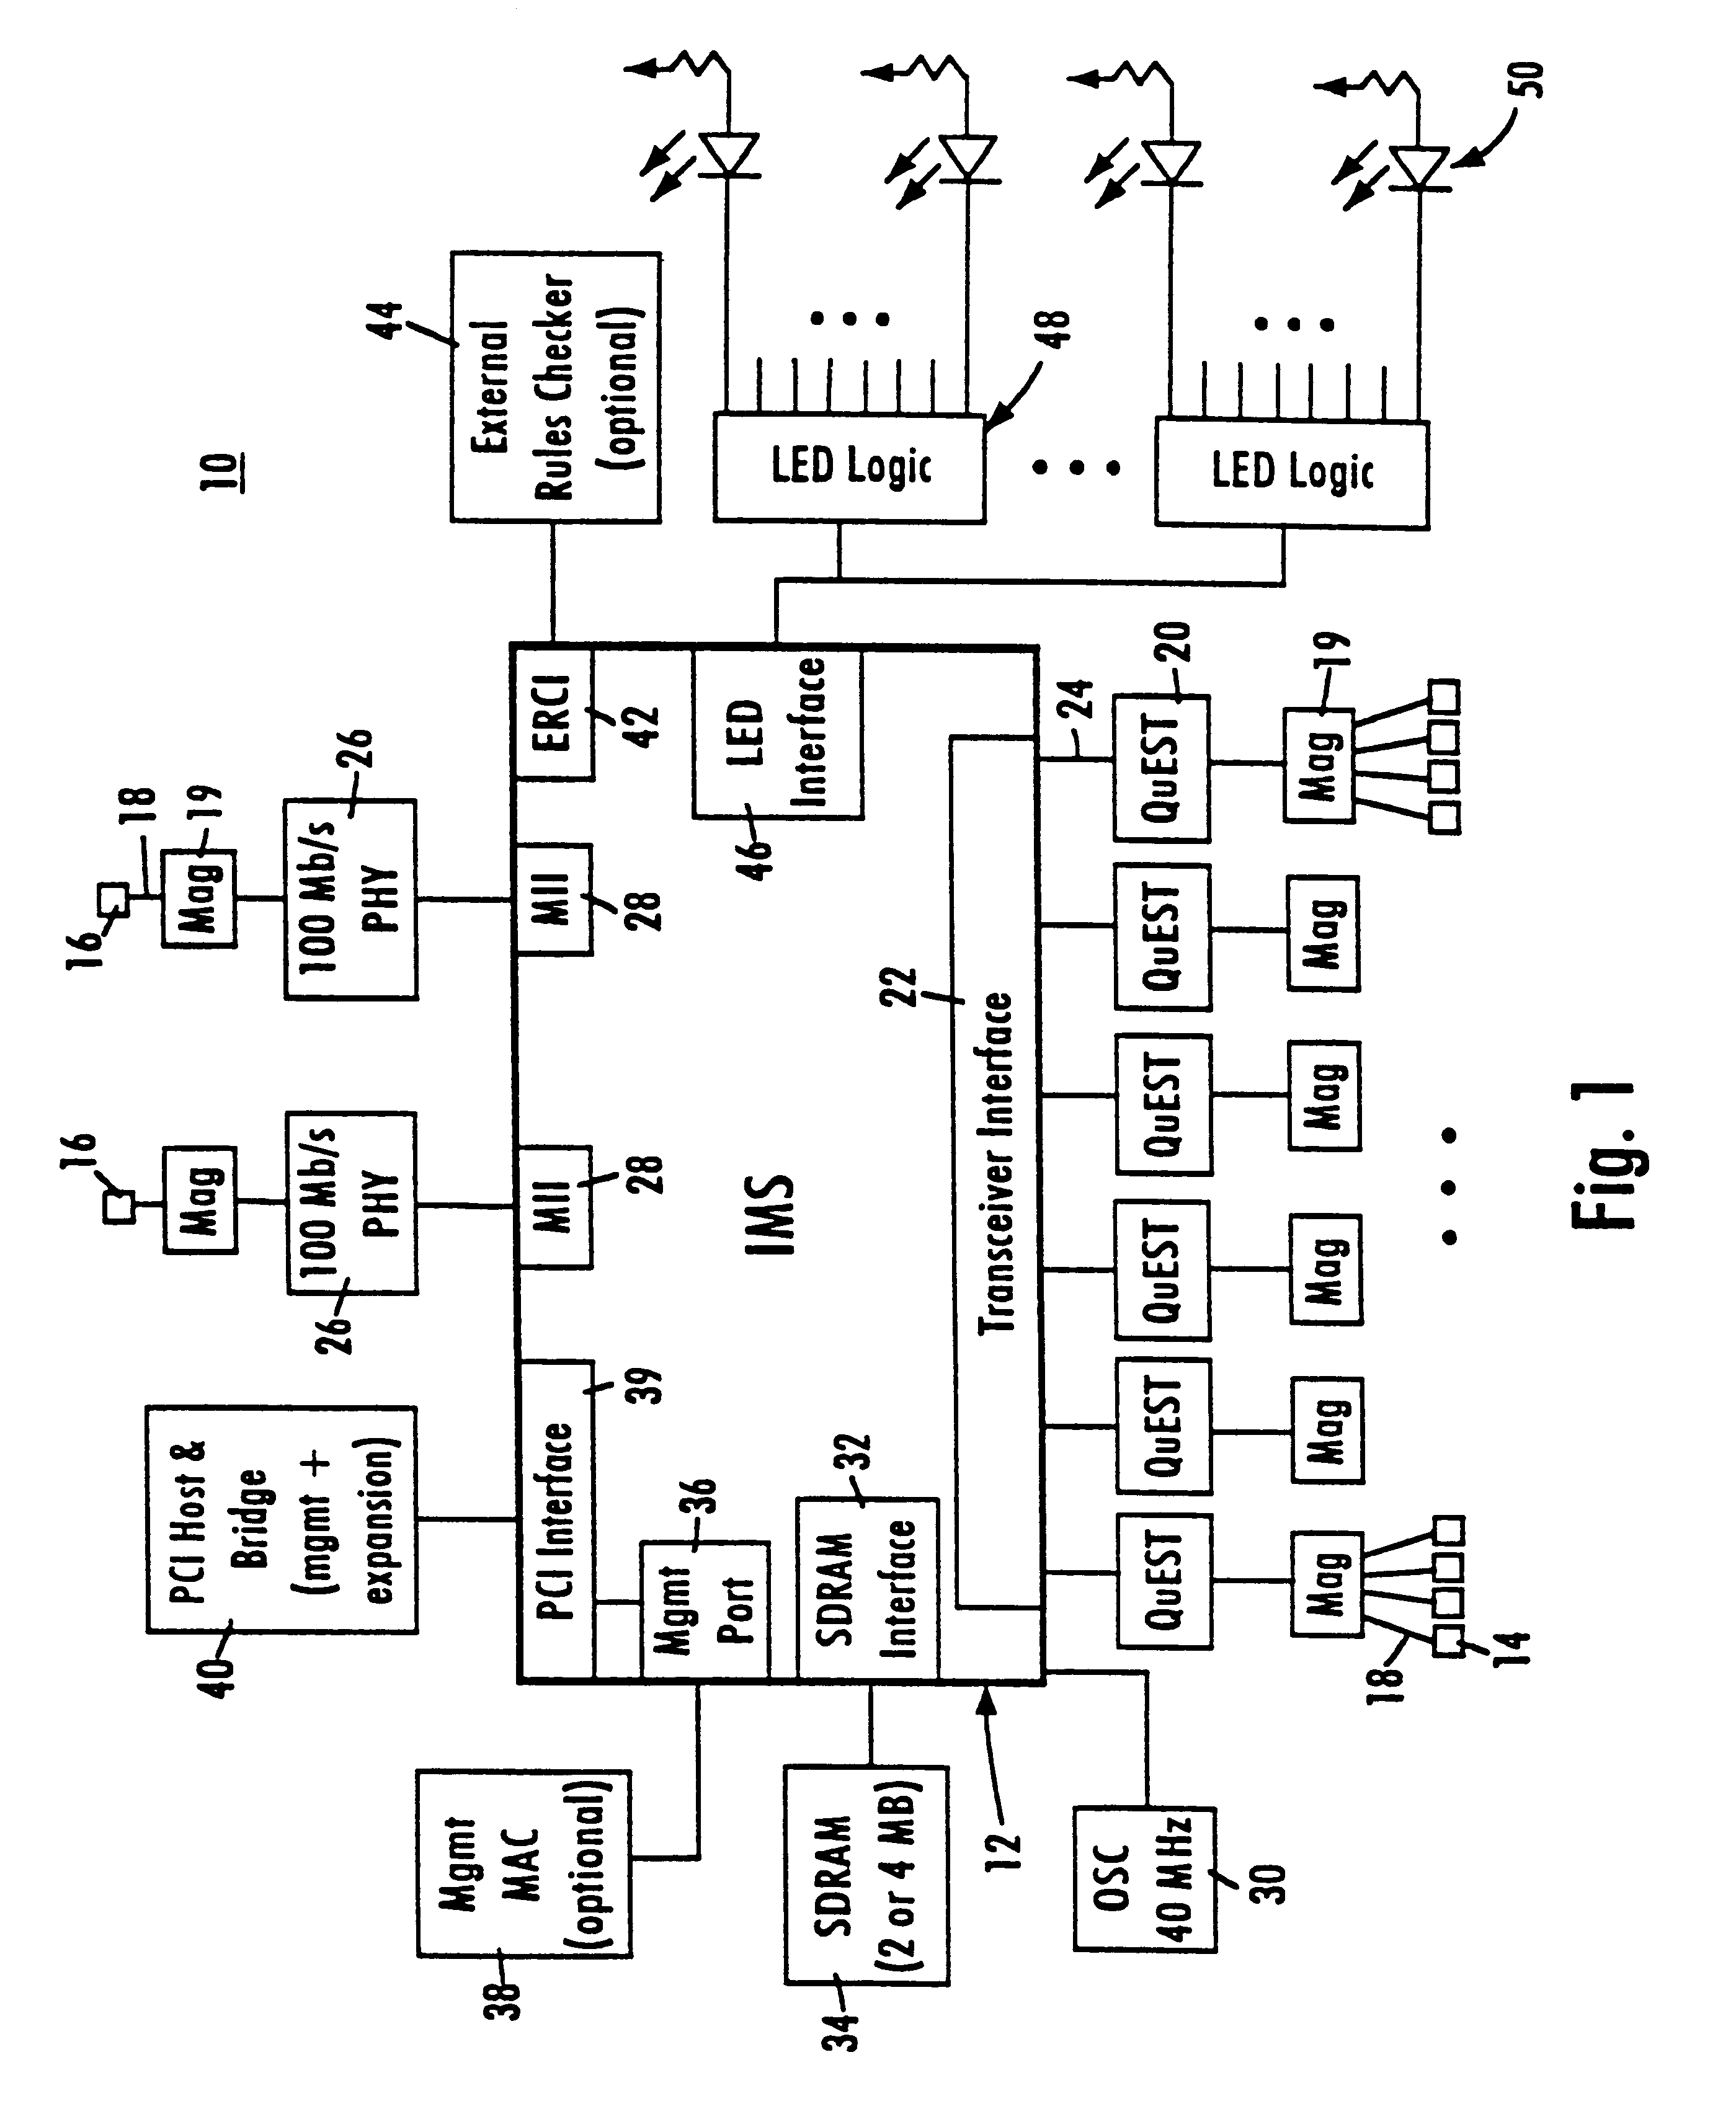 Method and apparatus providing programmable thresholds for half-duplex flow control in a network switch